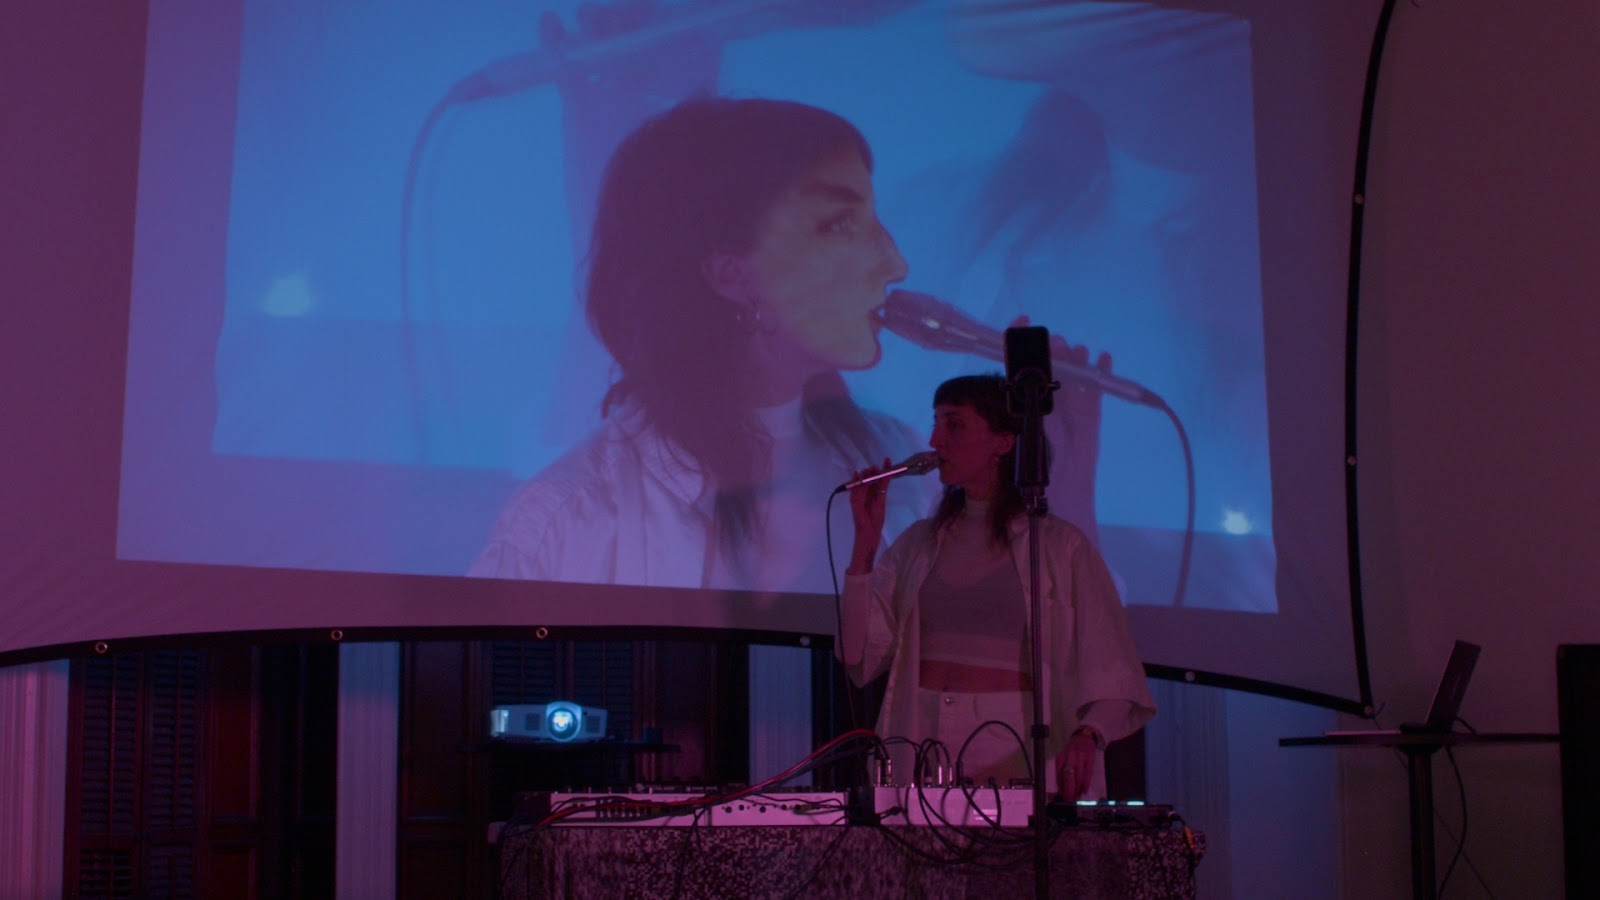 Image: Jessica Tucker performs “Possession” at PS1 Close House. Photo courtesy of the artist. A performer wearing all white stands behind a DJ booth. An iPhone is set up on a tripod in front of them. The performer is standing facing the left side of the image and singing into a microphone. A projector behind the performer displays an image of the performer facing the opposite direction while wearing an AR filter of the performer’s face. A larger projection facing the same direction as the performer is half-visible behind the first.